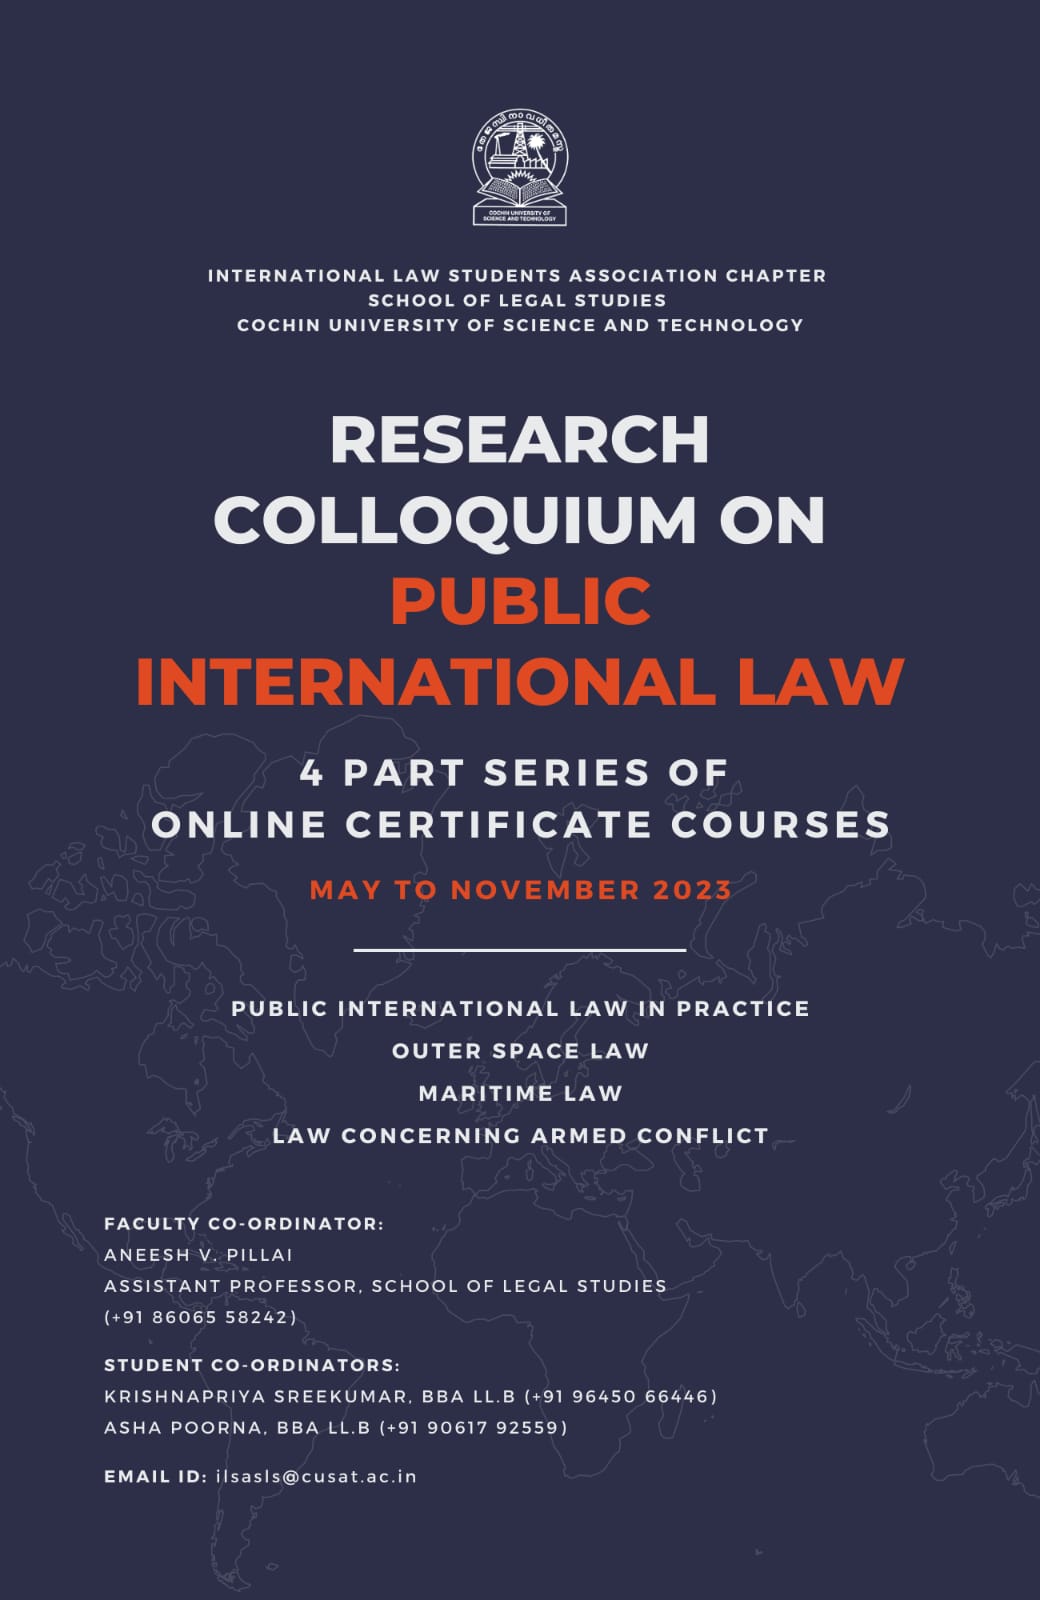 Research Colloquium on ‘Public International Law 2023, a four-part series of online certificate courses organized by the International Law Students Association (ILSA) Chapter at the School of Legal Studies, CUSAT [june – November 2023 , in online Mode]: Register By 25th April 2023